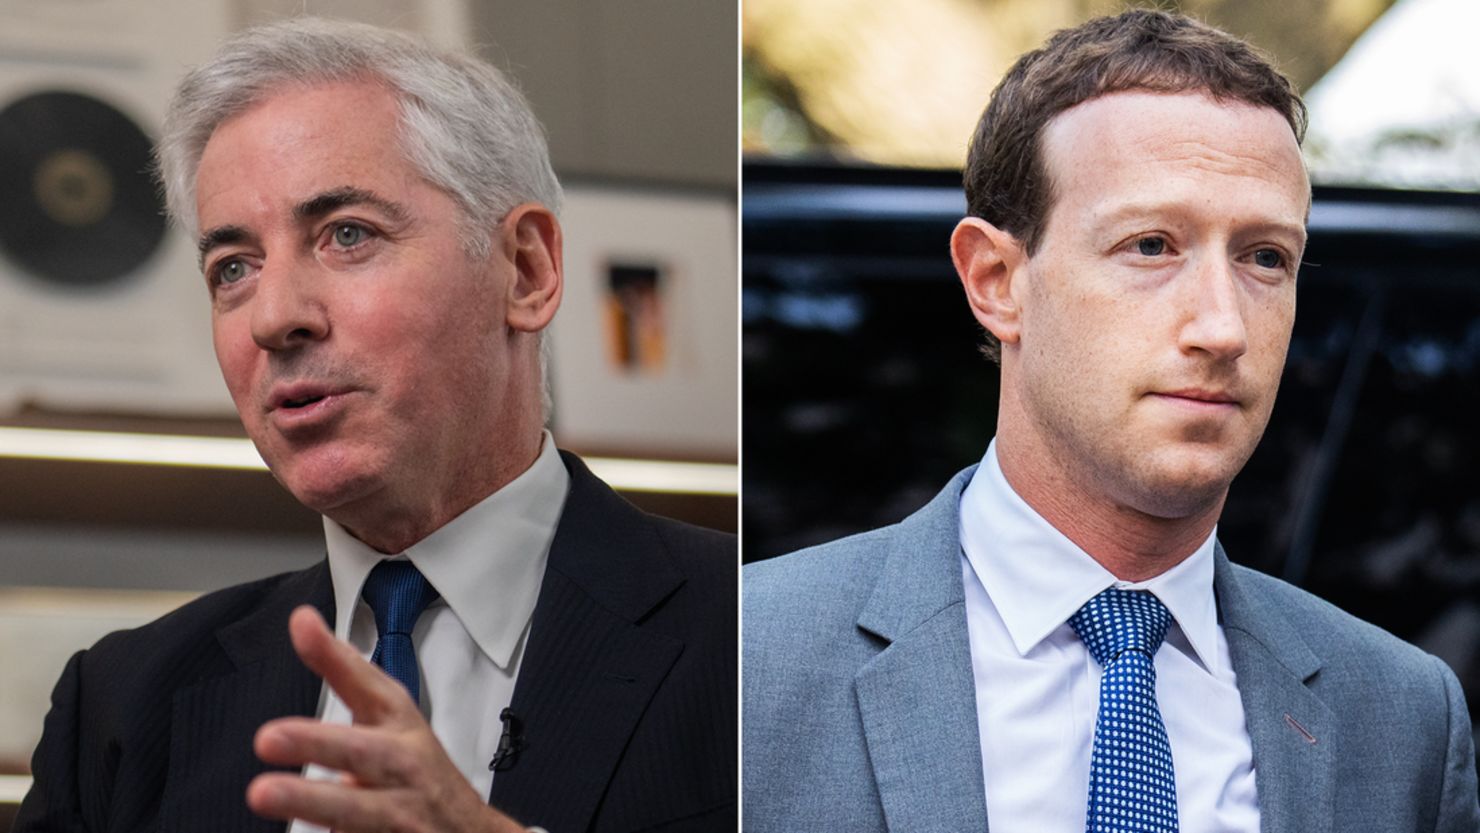 Left: Bill Ackman, CEO of Pershing Square Capital Management; Right: Mark Zuckerberg, CEO of Meta.